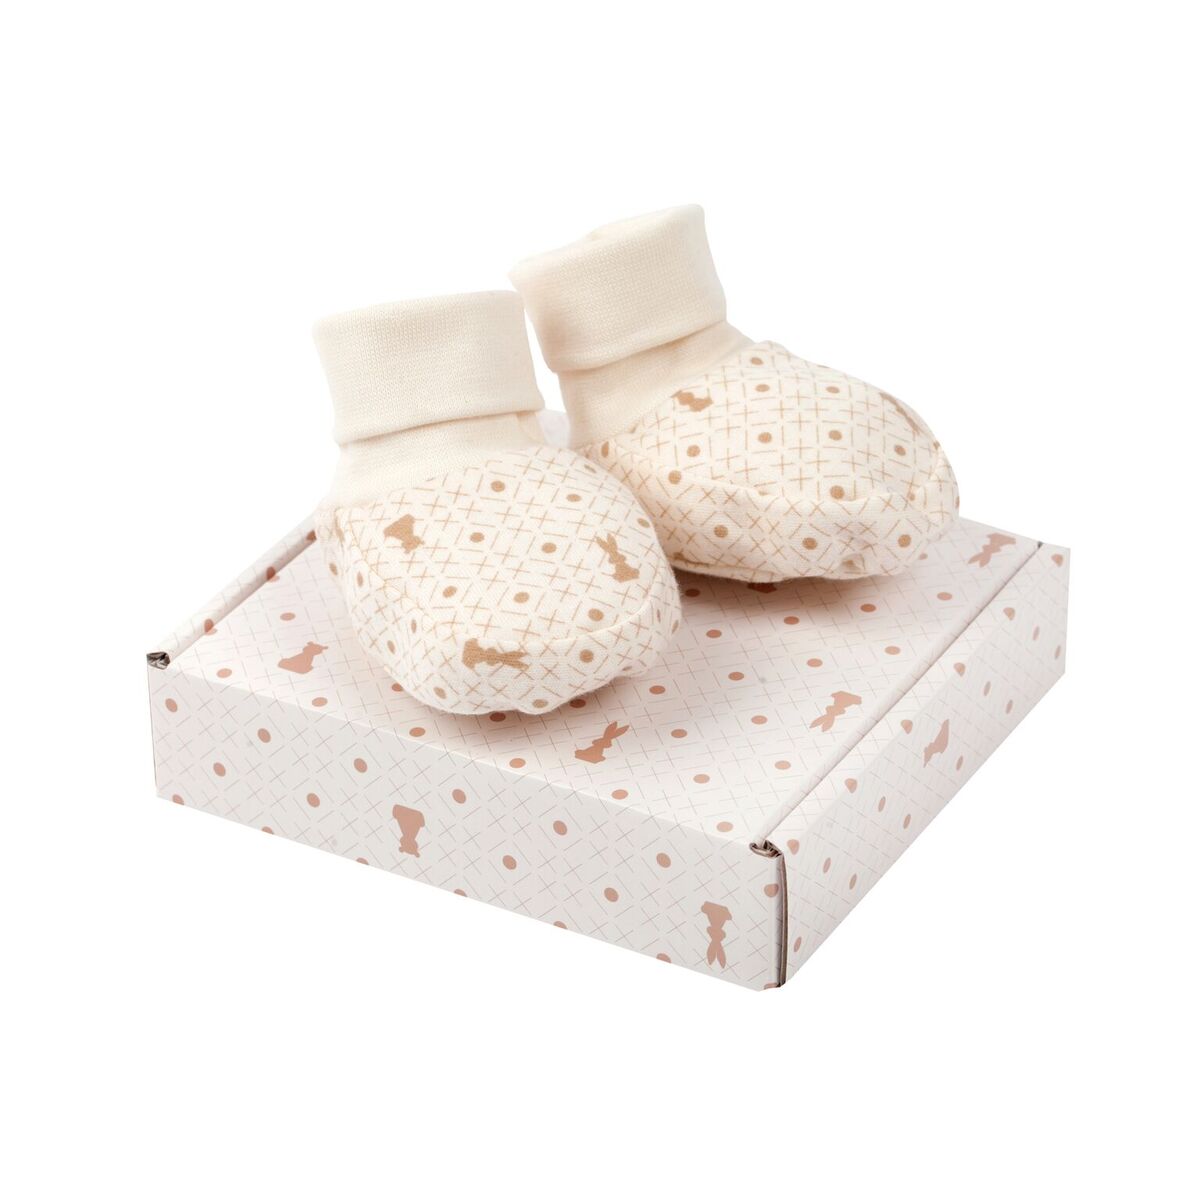 Wooly Organic Soft Cotton Booties